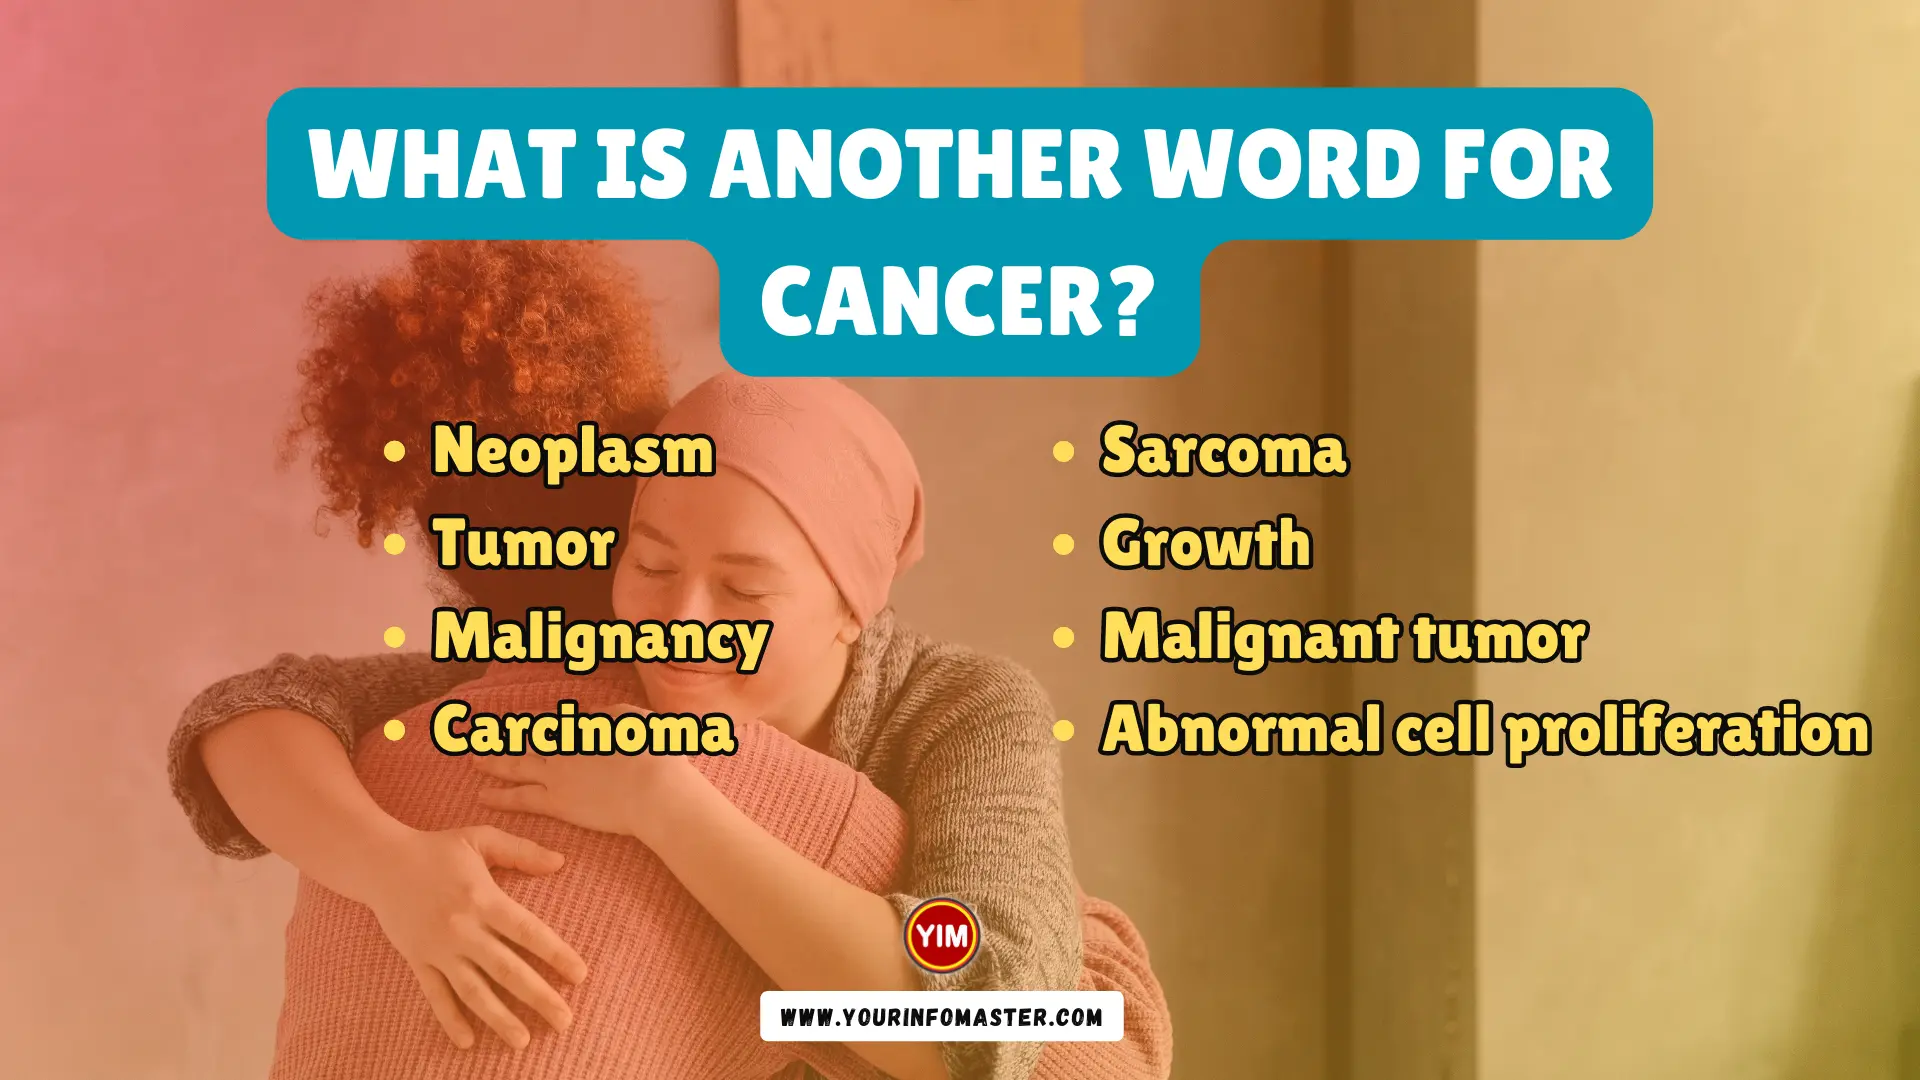 What is another word for Cancer